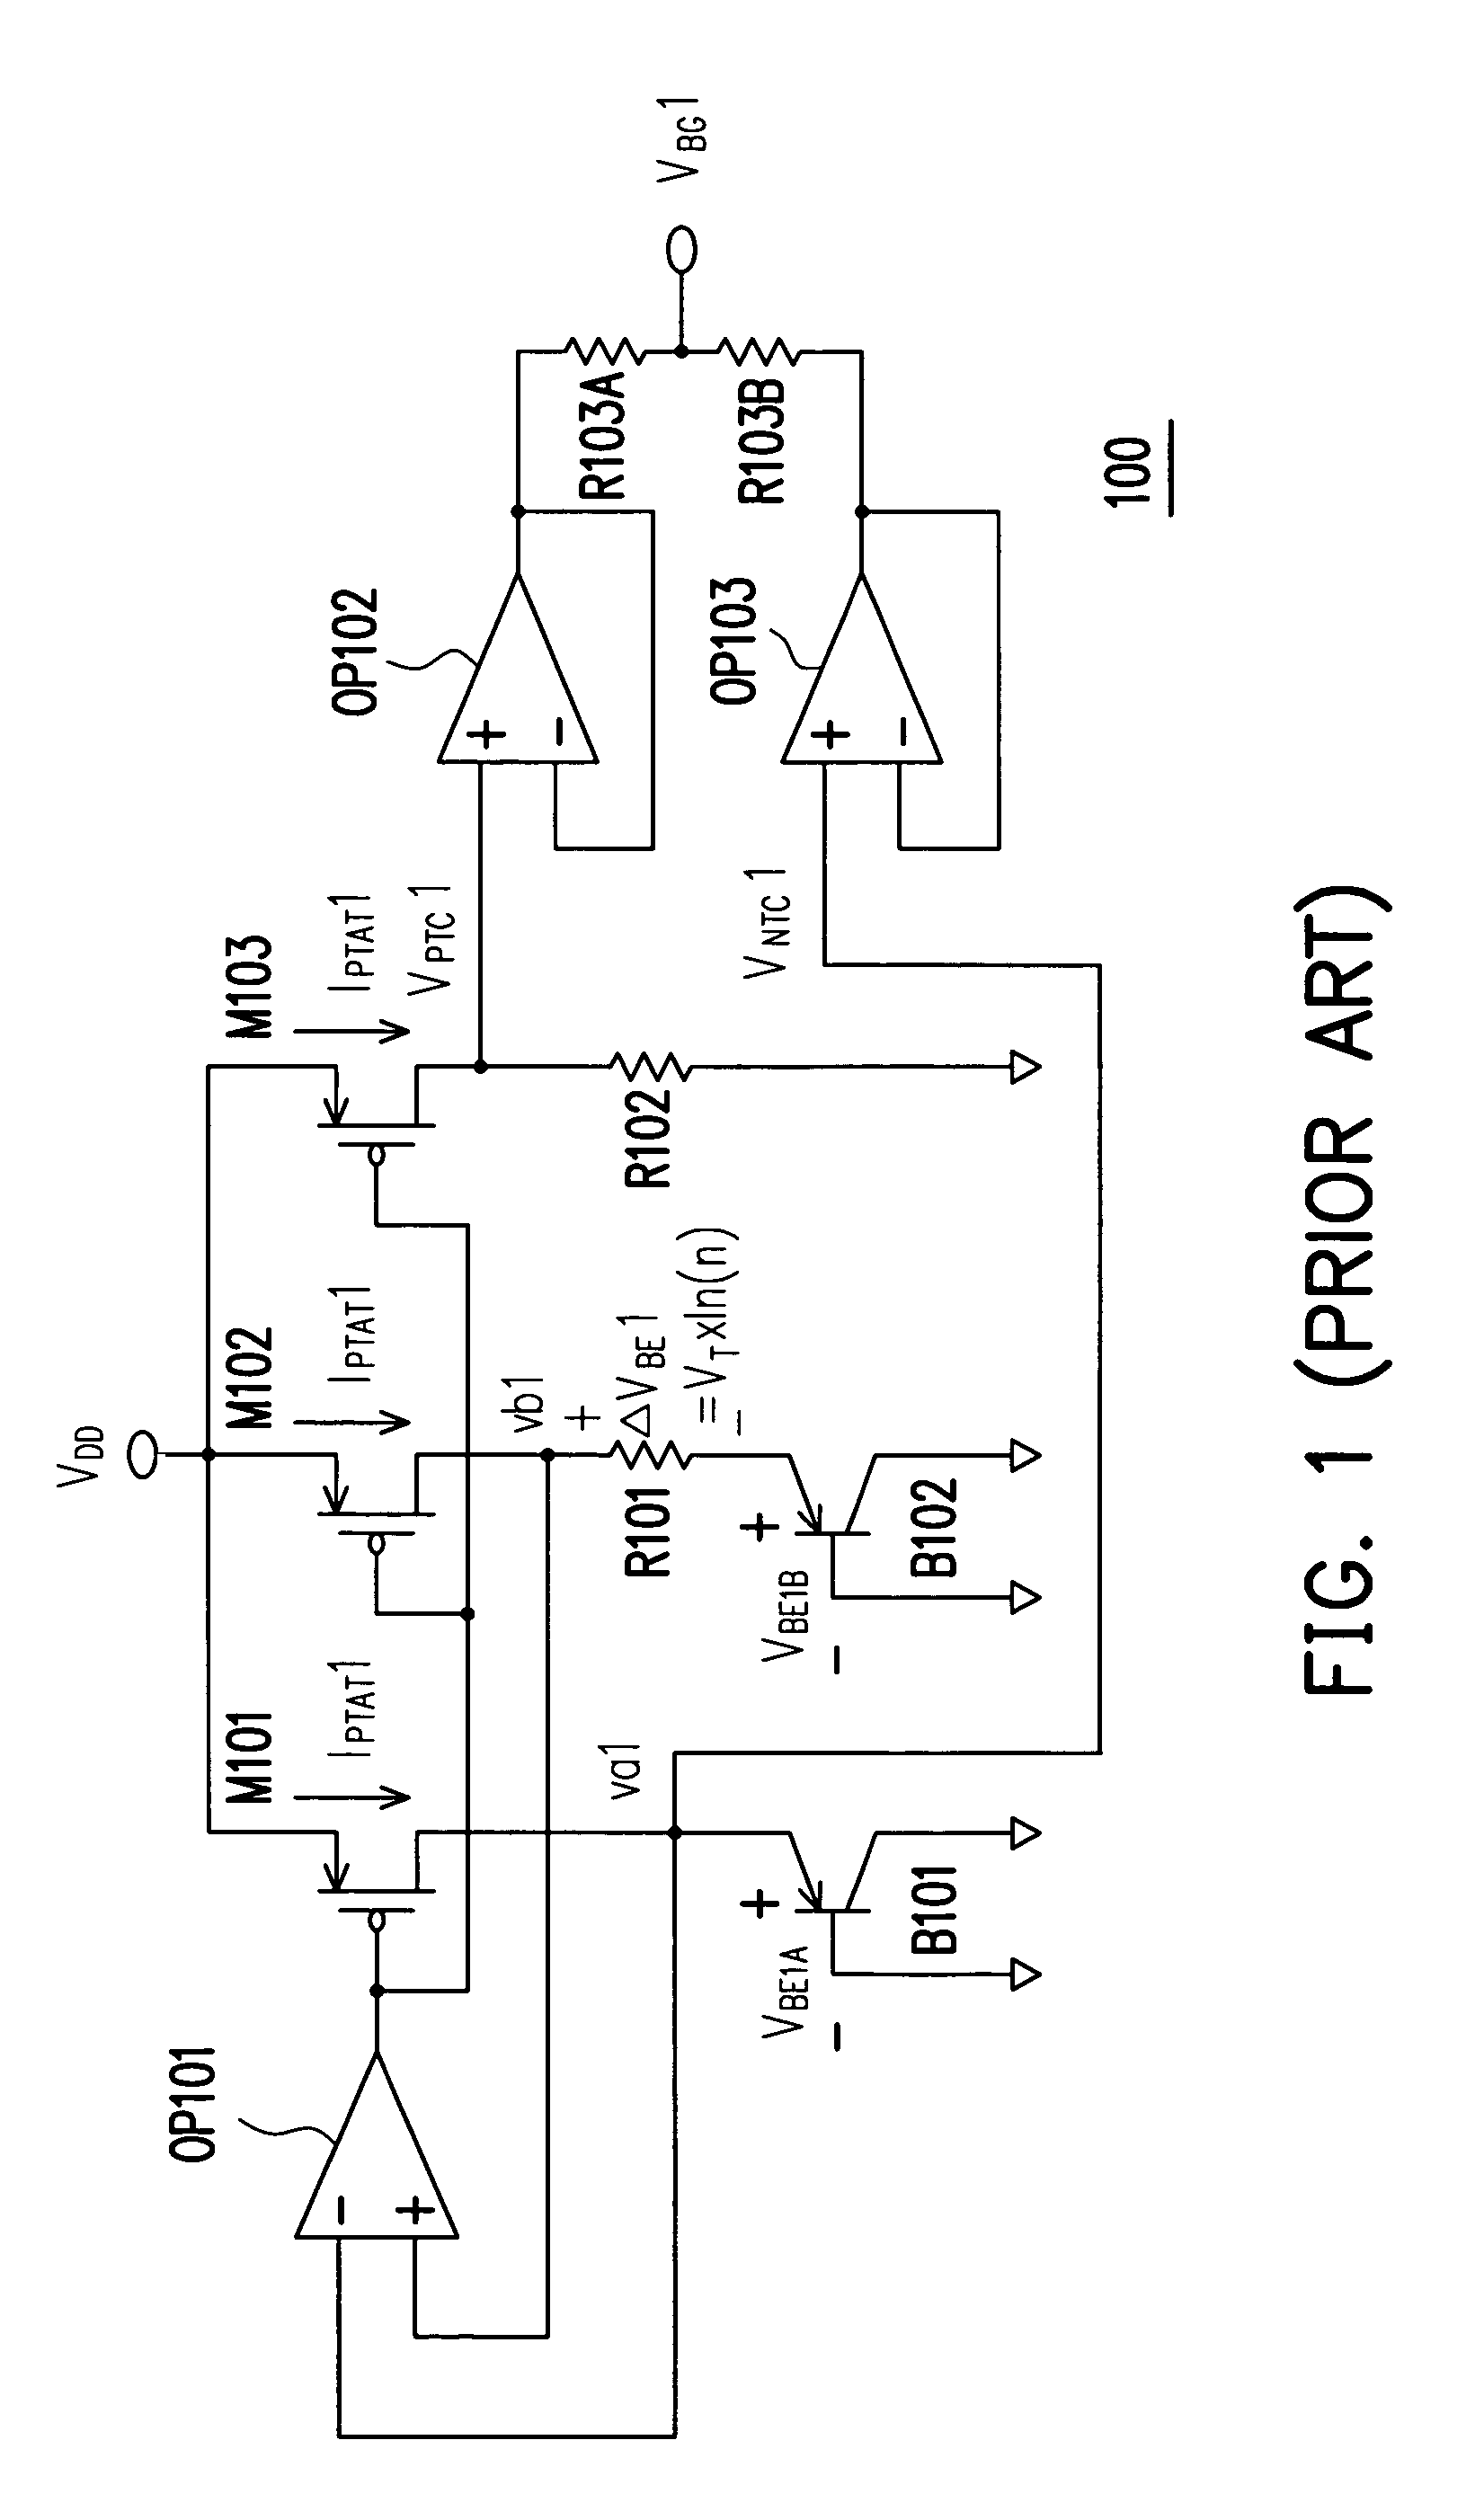 Non-linearity compensation circuit and bandgap reference circuit using the same